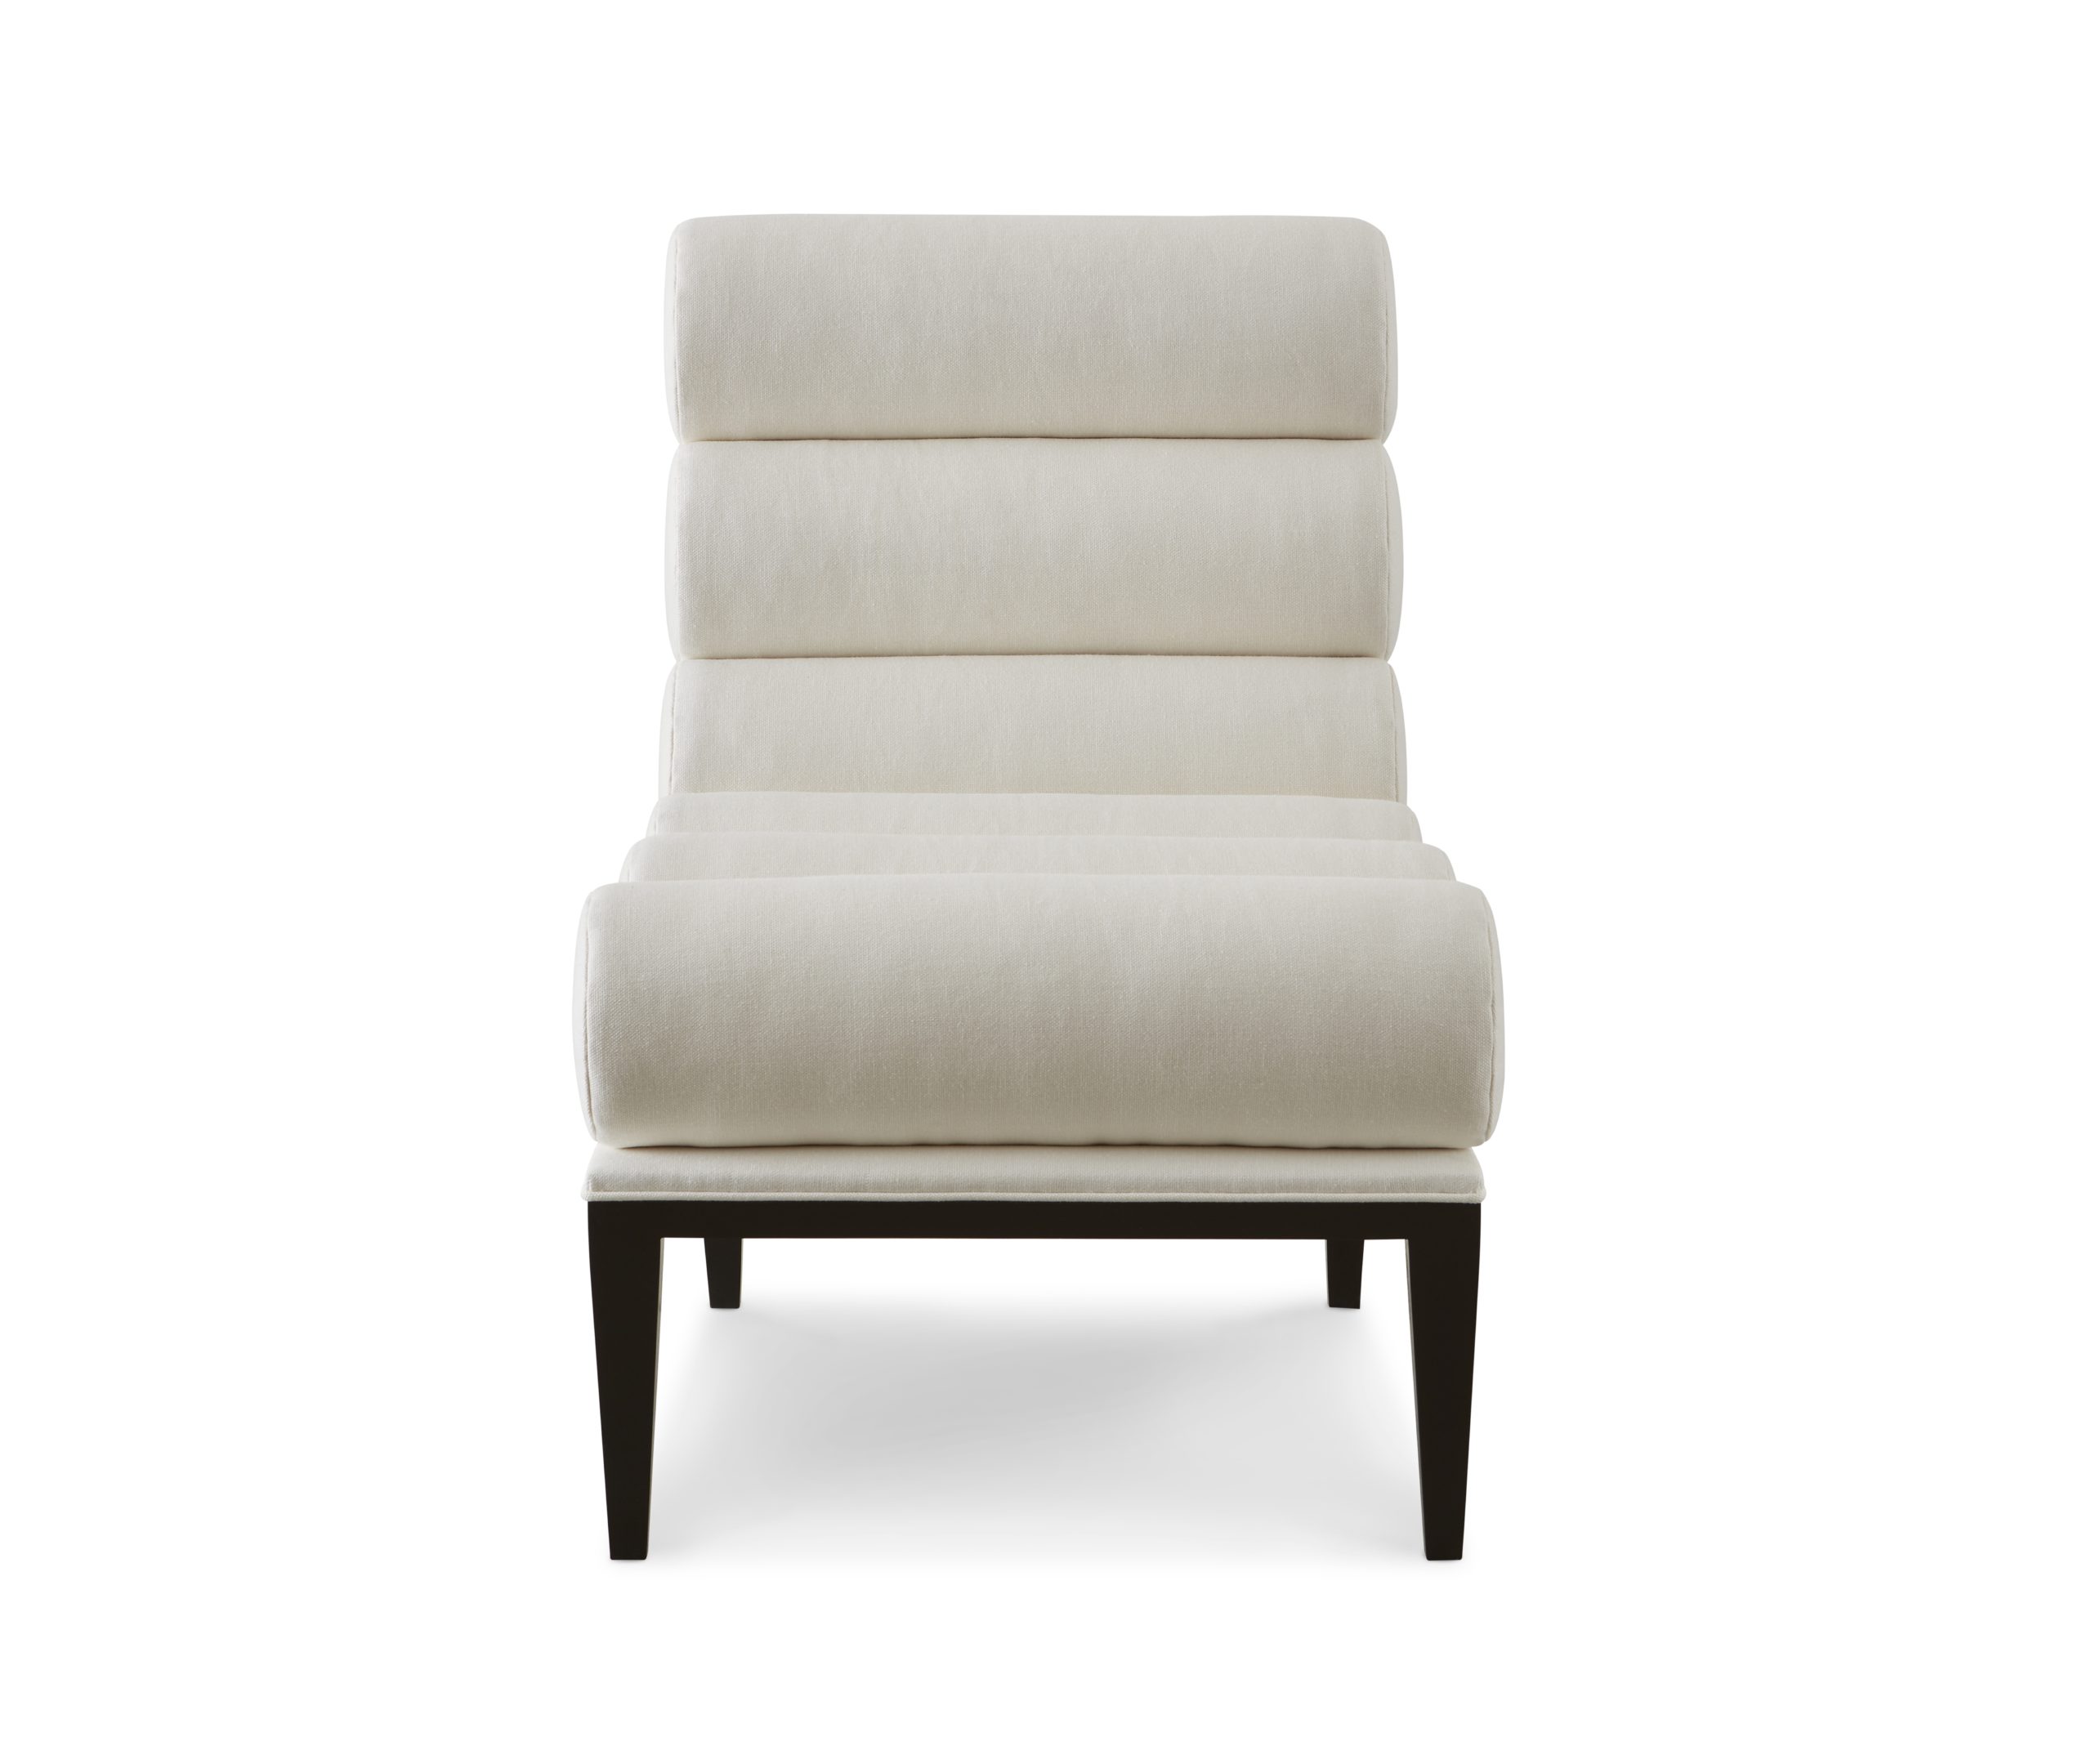 Baker_products_WNWN_arlo_lounge_chair_BAU3308c_FRONT-scaled-1